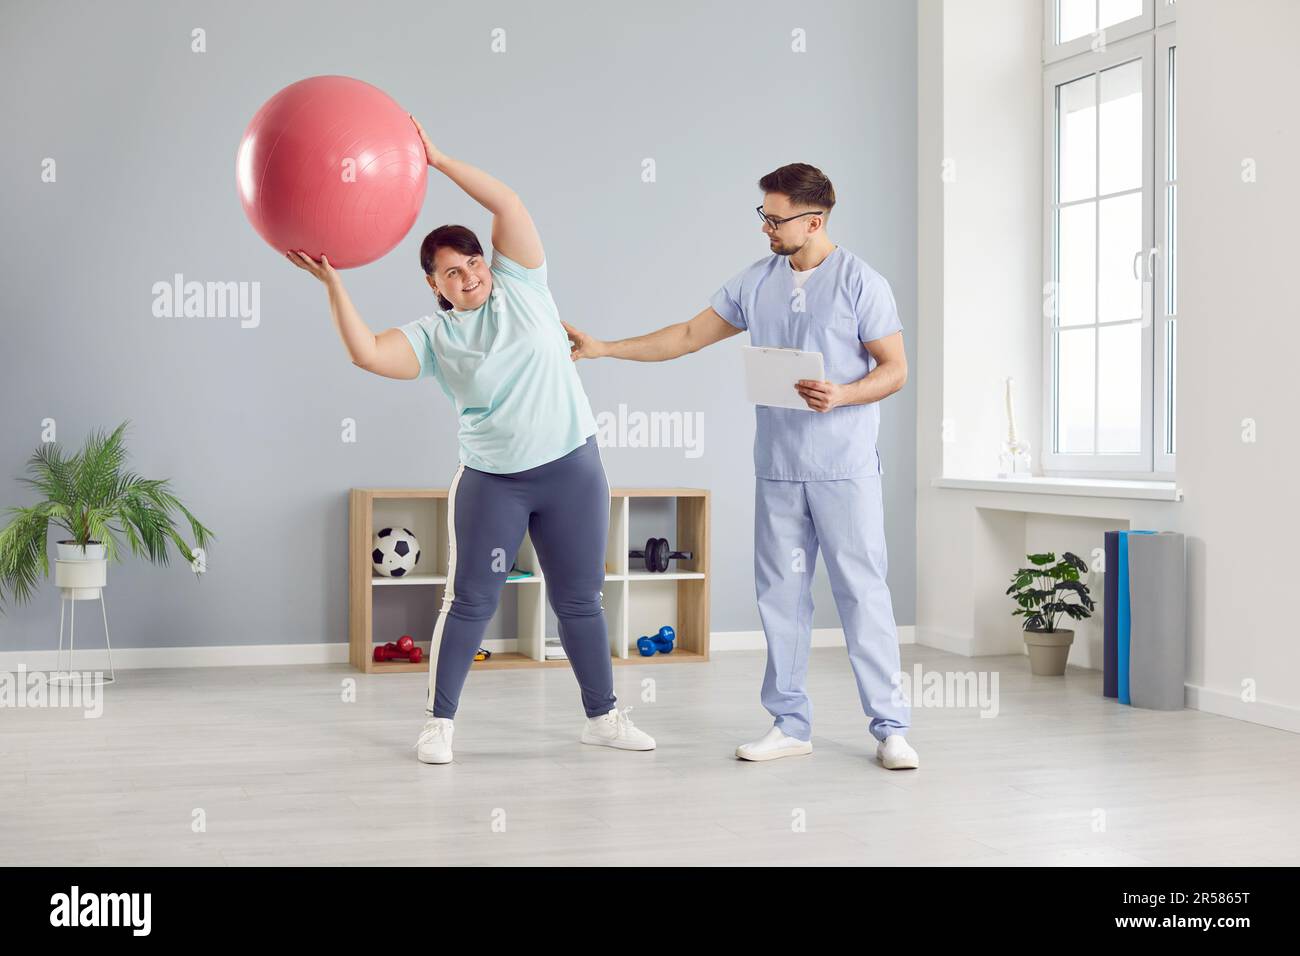 Physiotherapist helping overweight woman patient to do side bends with balance ball Stock Photo